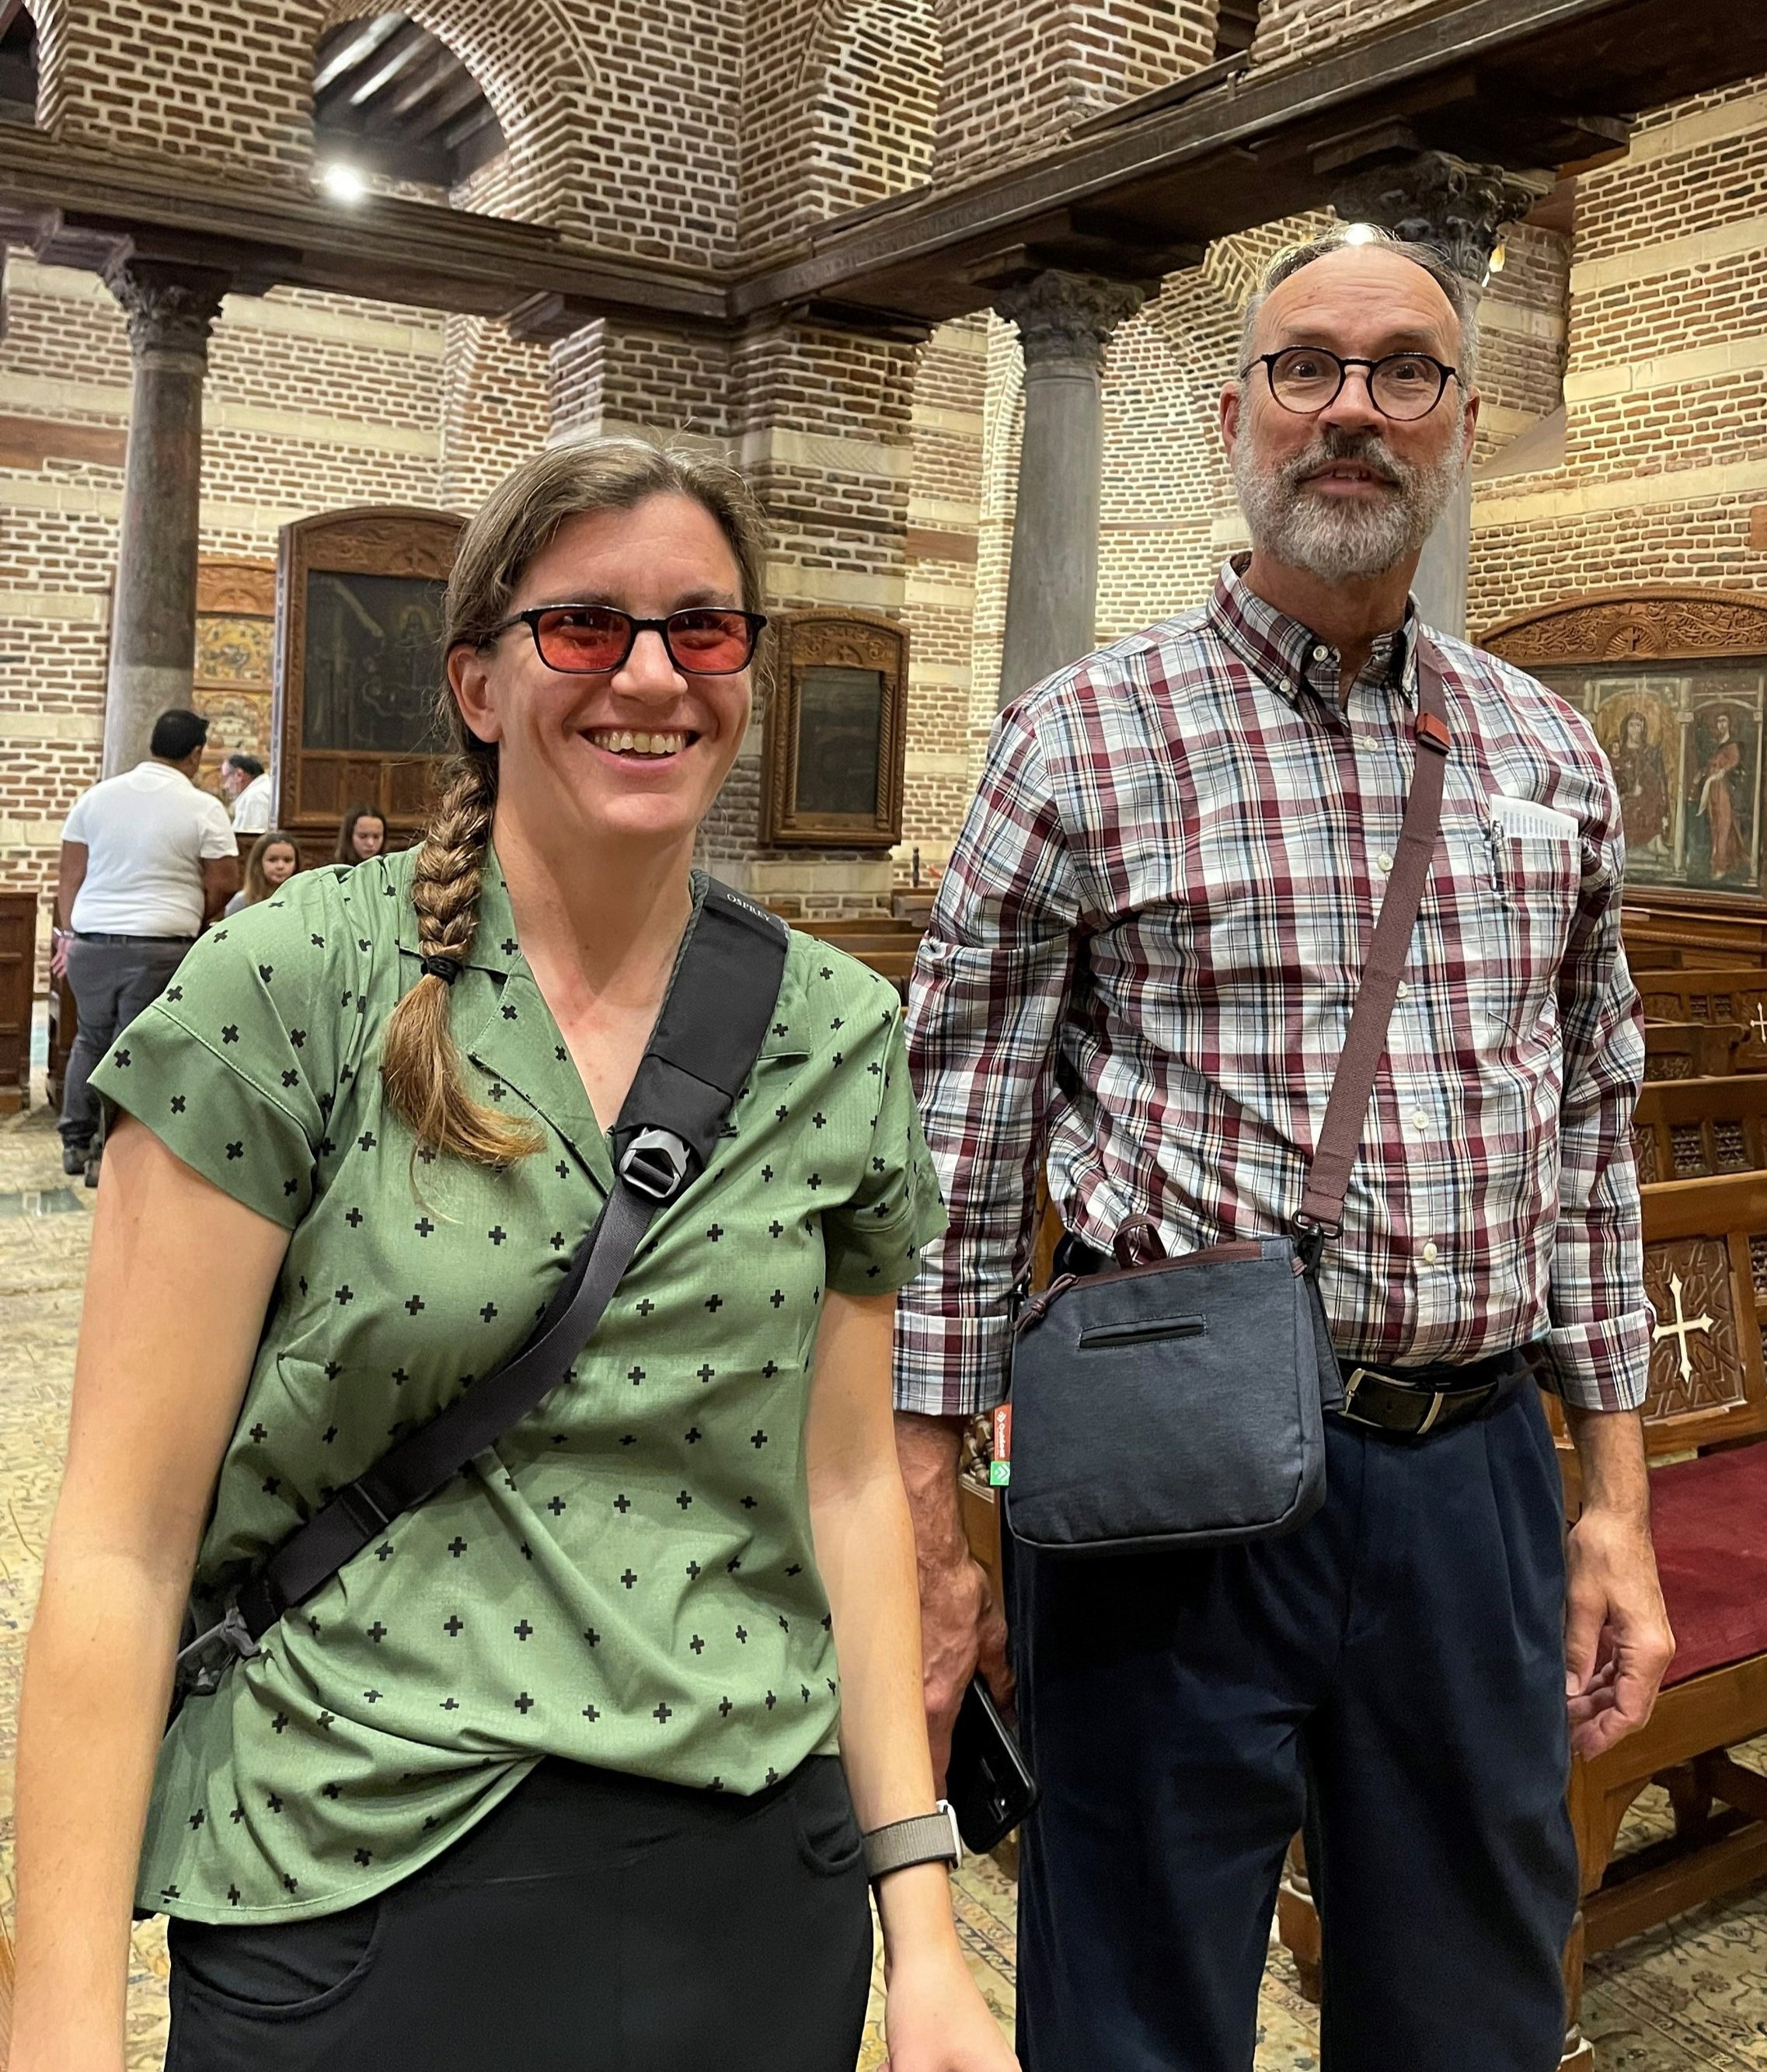   Kimmy Briggs (4th time to Egypt) and Steve Burgess (2nd time to Egypt) exploring the Church of Sts Sergius and Baachus  